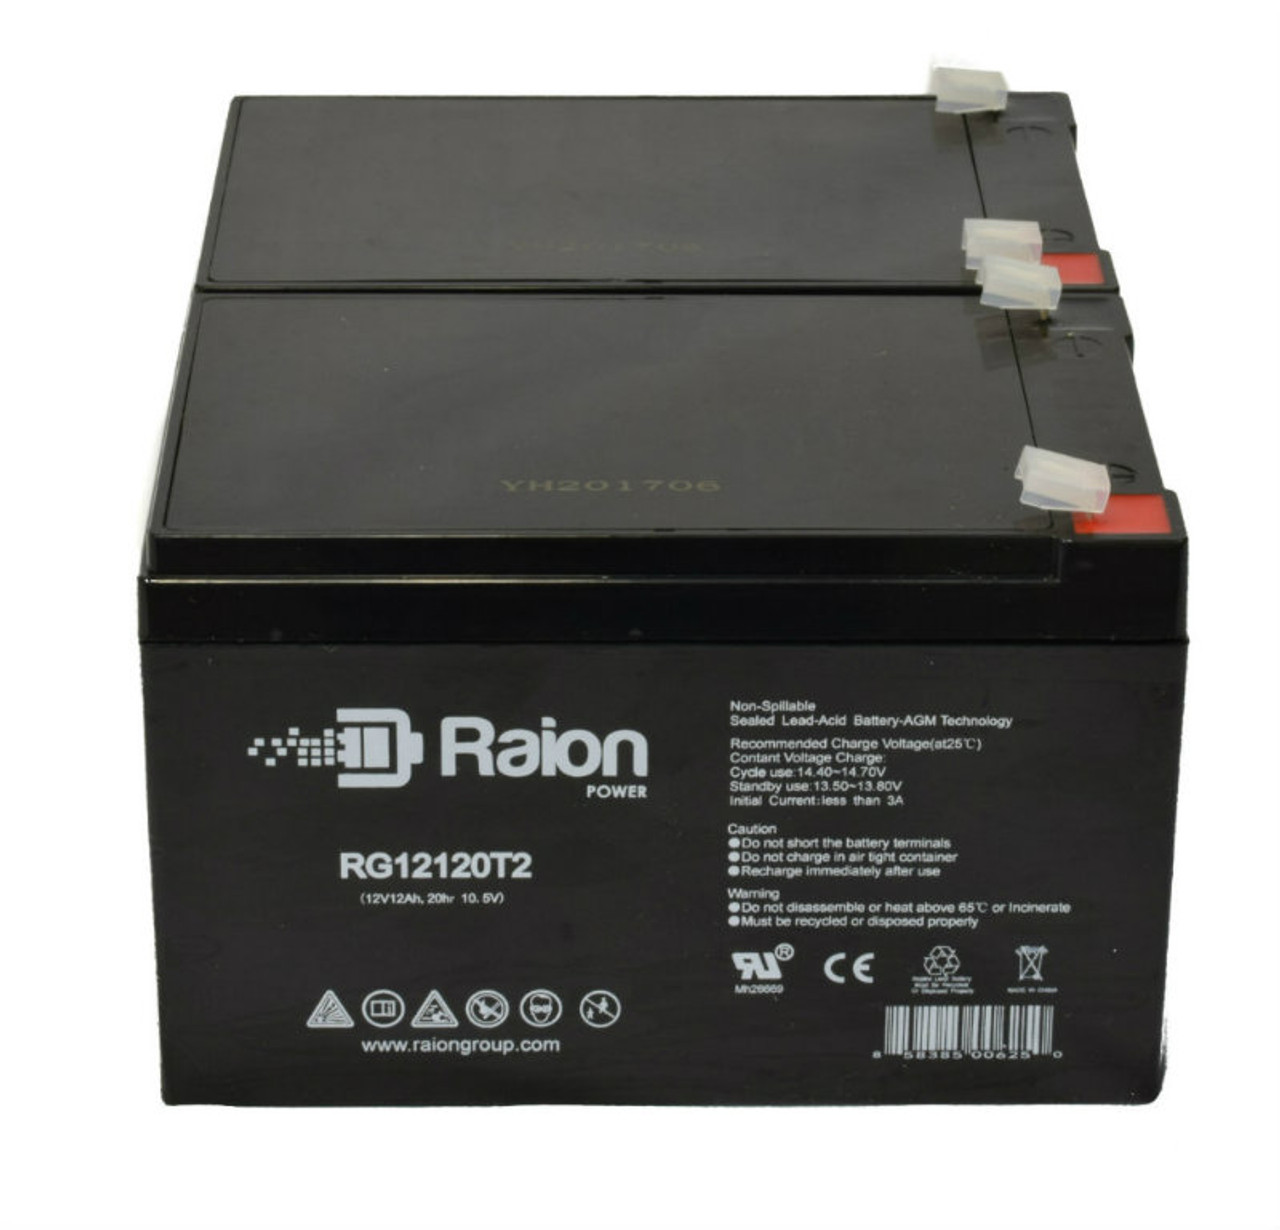 Raion Power RG12120T2 Replacement Emergency Light Battery for Power Mate PM12100/PM12120 - 2 Pack